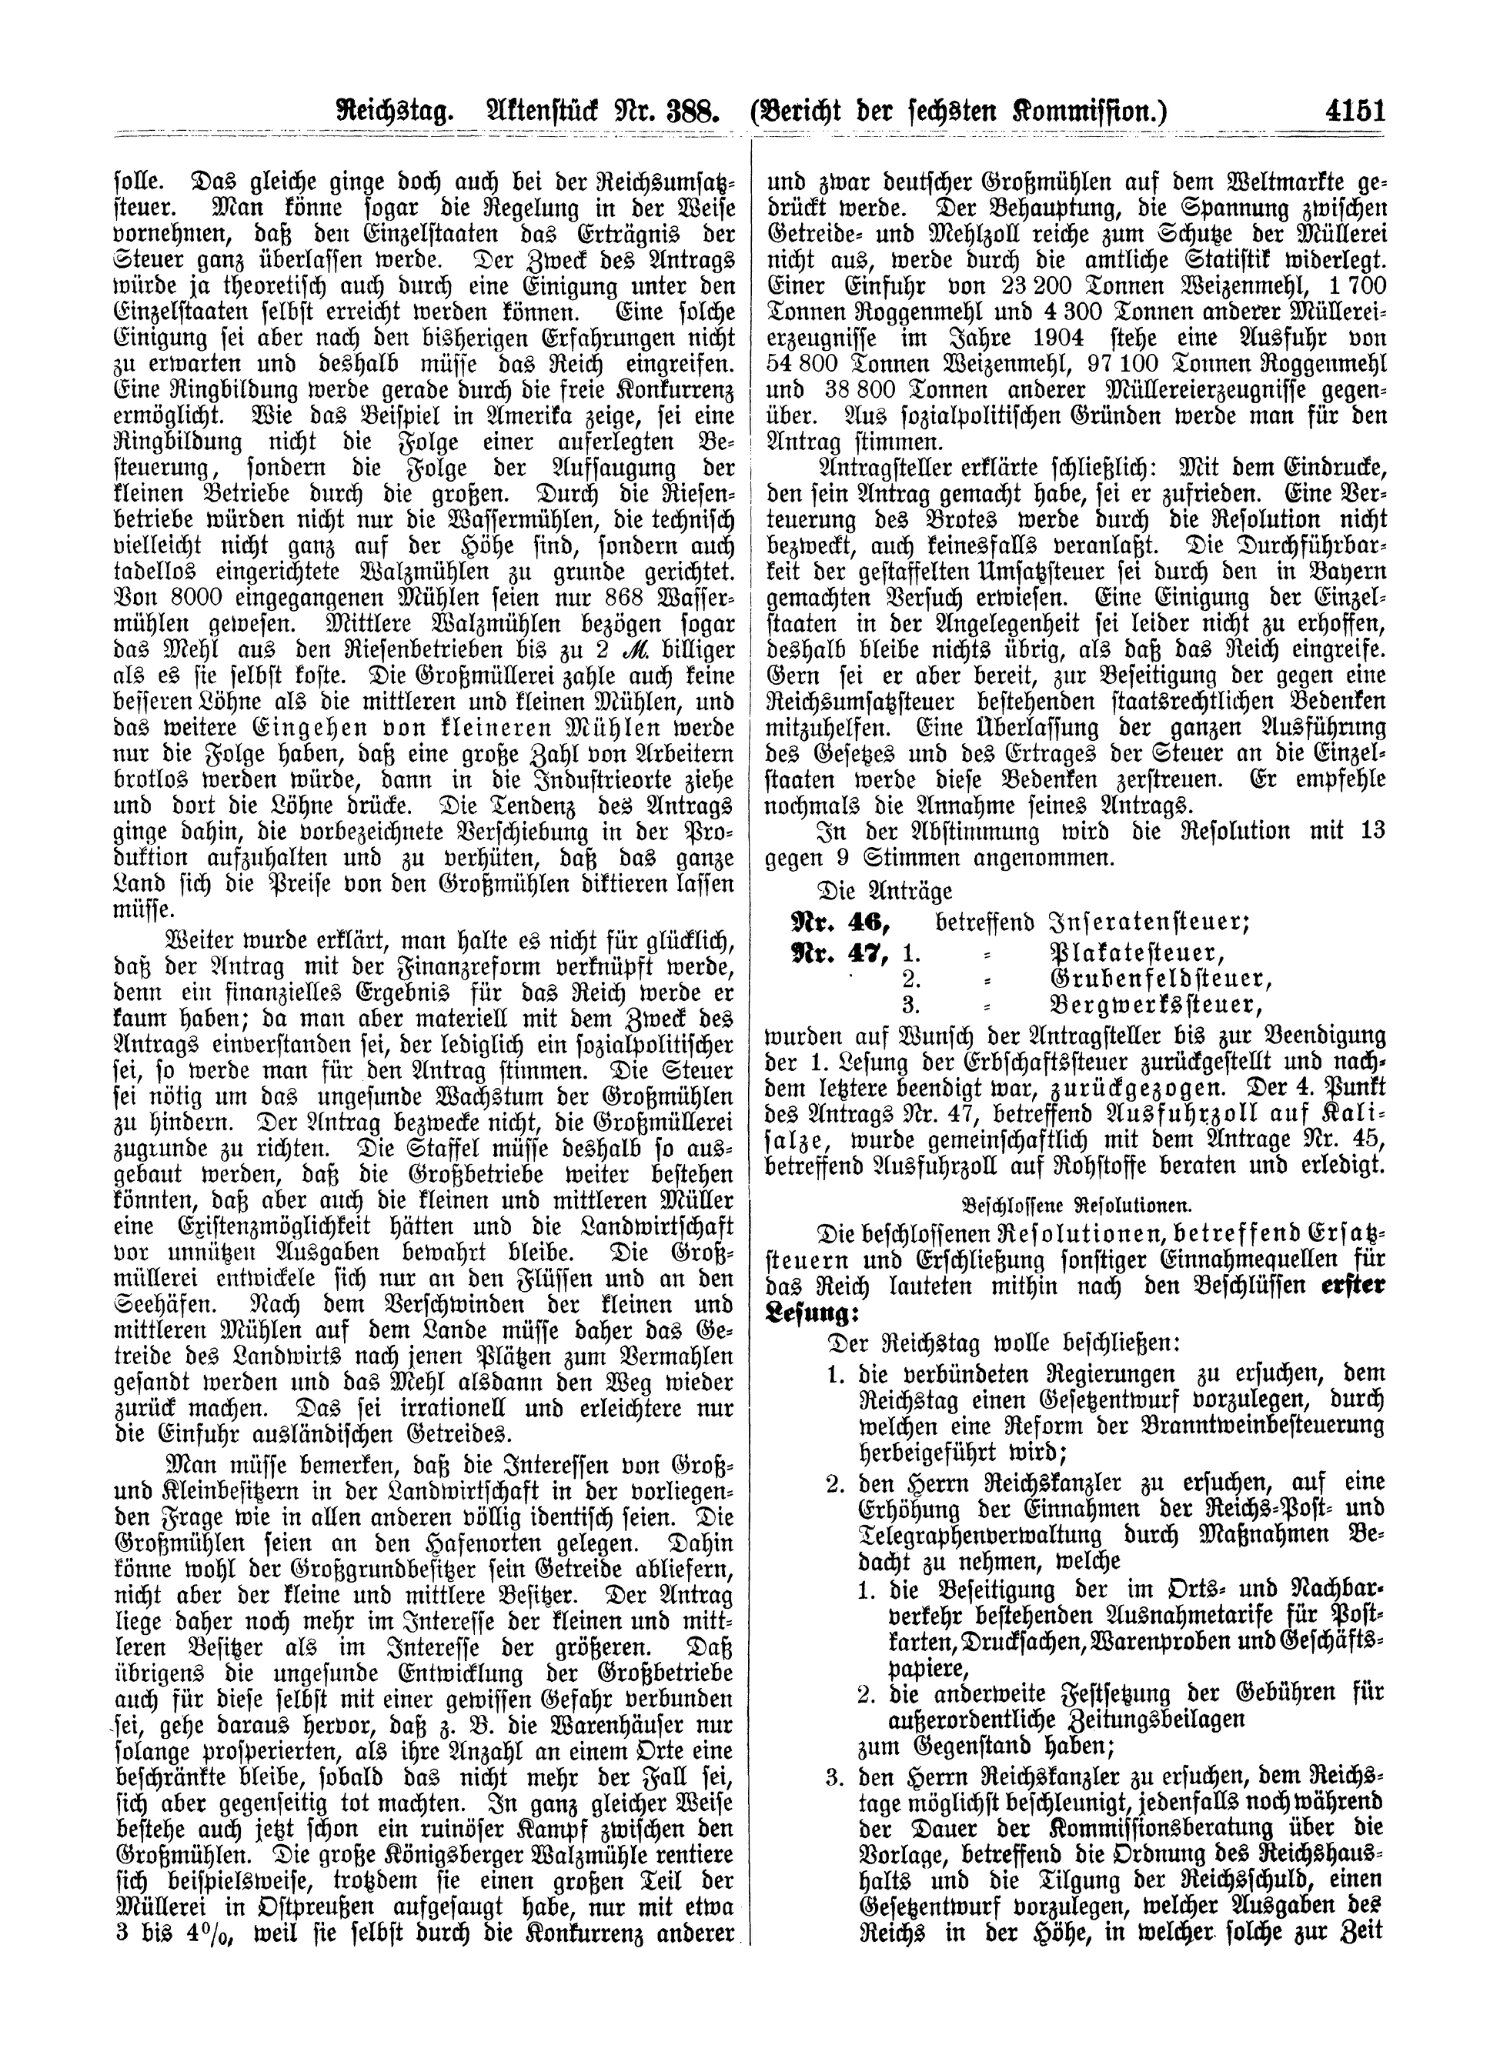 Scan of page 4151